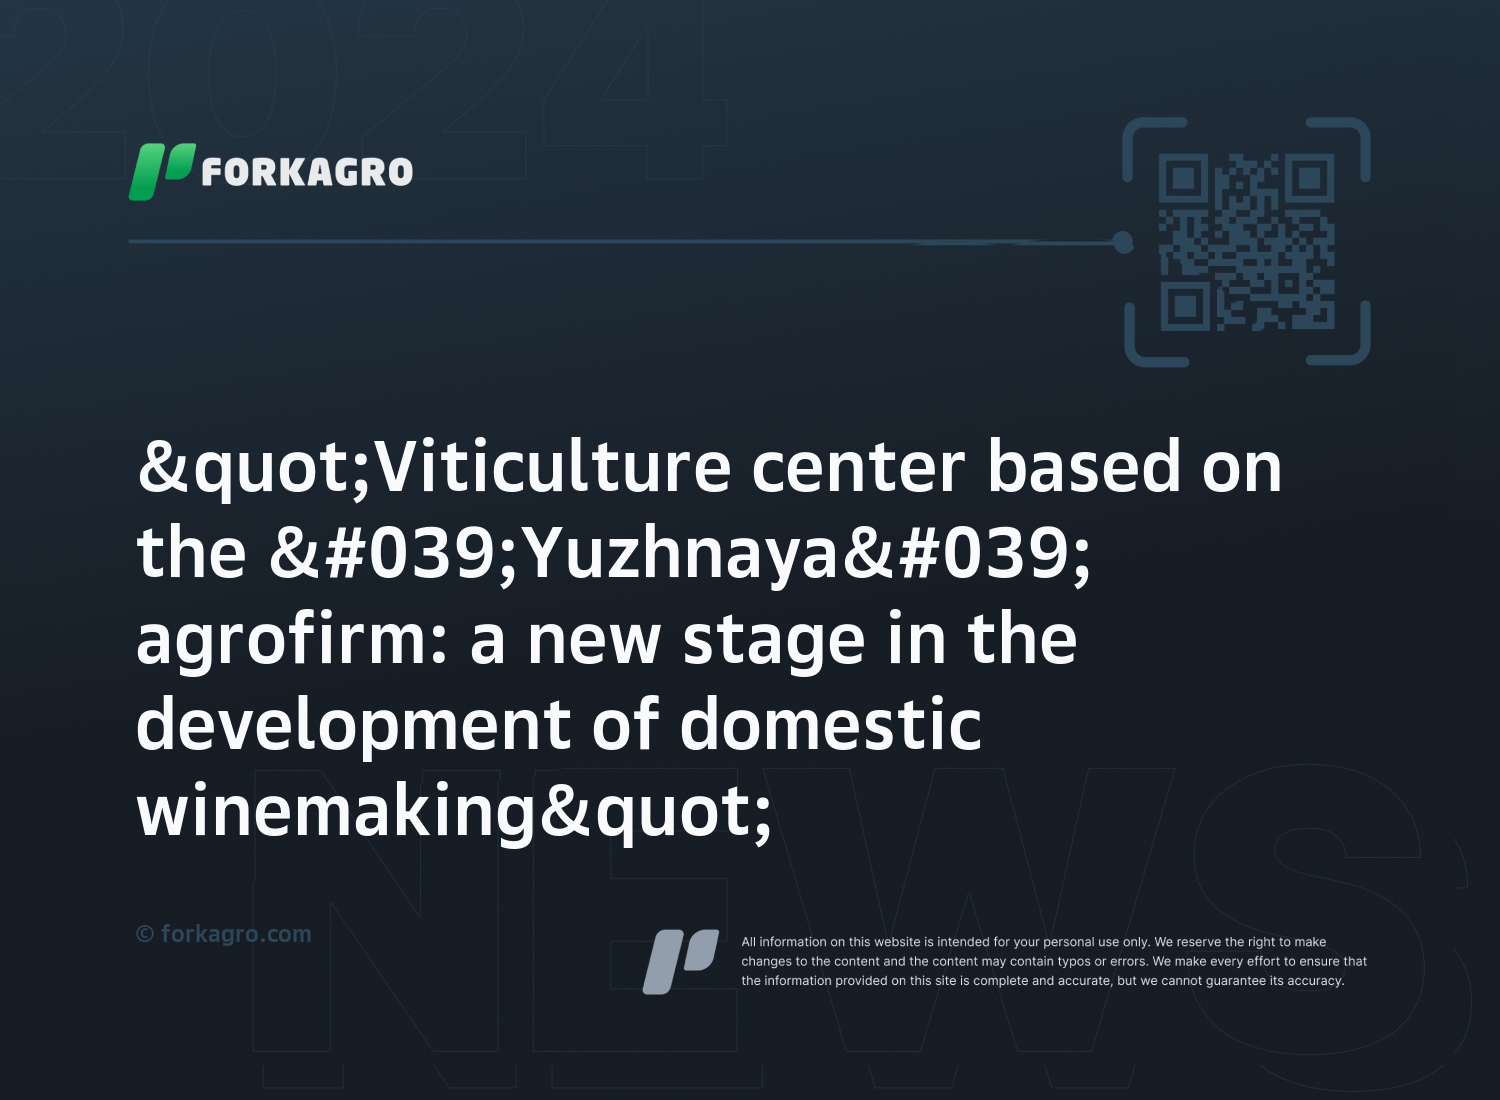 "Viticulture center based on the 'Yuzhnaya' agrofirm: a new stage in the development of domestic winemaking"